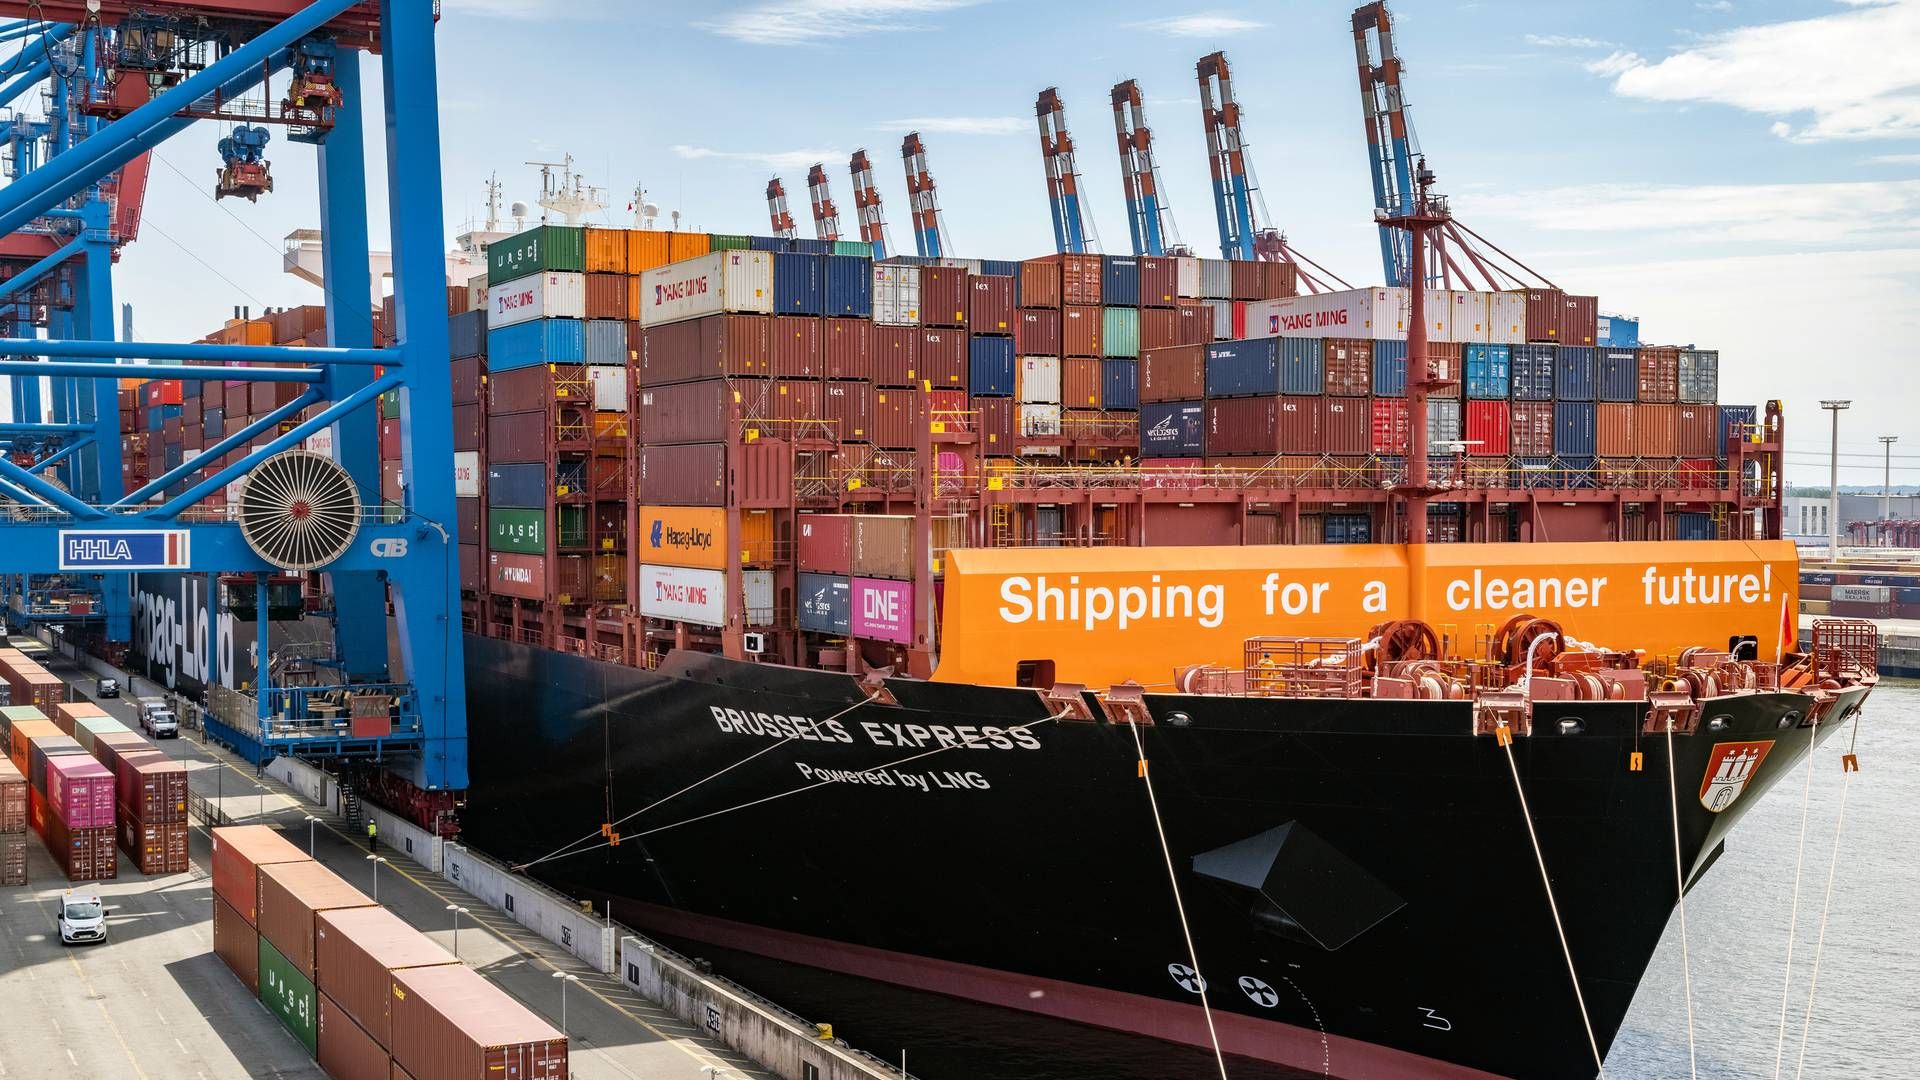 According to Lars Jensen, CEO of Vespucci Maritime, the savings on the EU's upcoming climate tax by changing routes is around 18%. | Photo: Hapag-lloyd